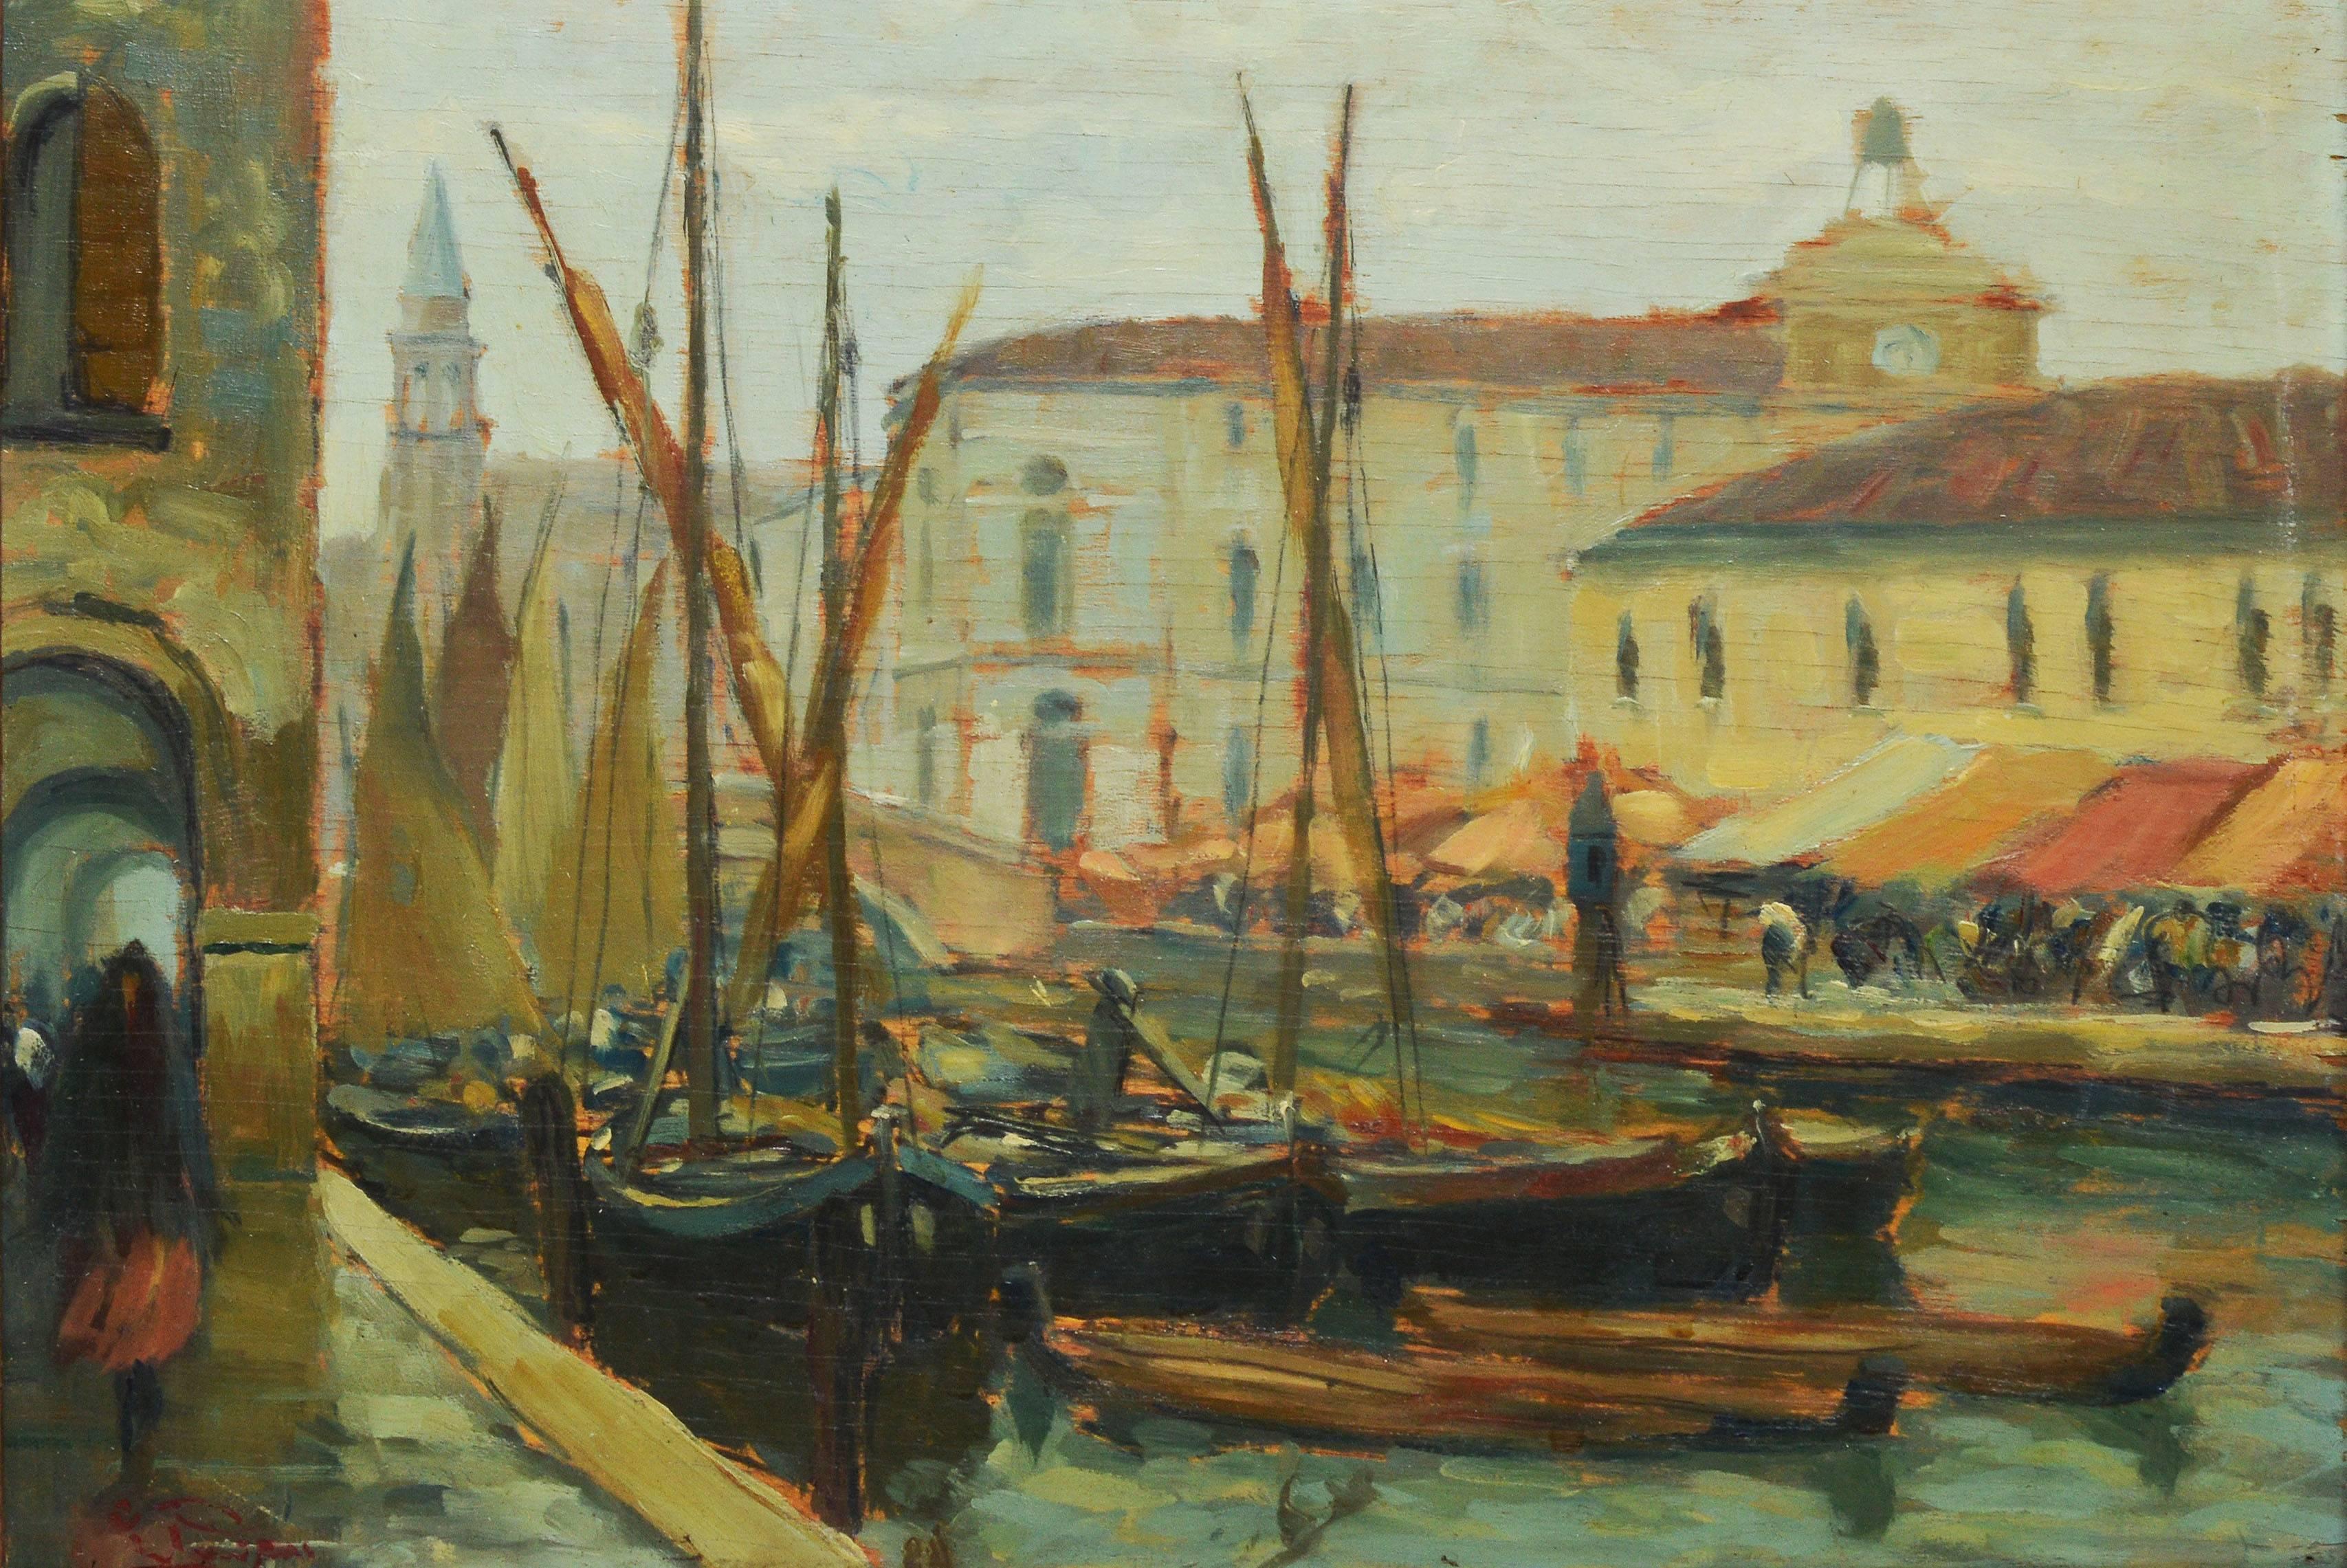 Impressionist view of Venice by Luigi Pagan  (1907 - 1980).  Oil on board, circa 1930.  Signed lower left.  Displayed in a giltwood frame.  Image size, 20